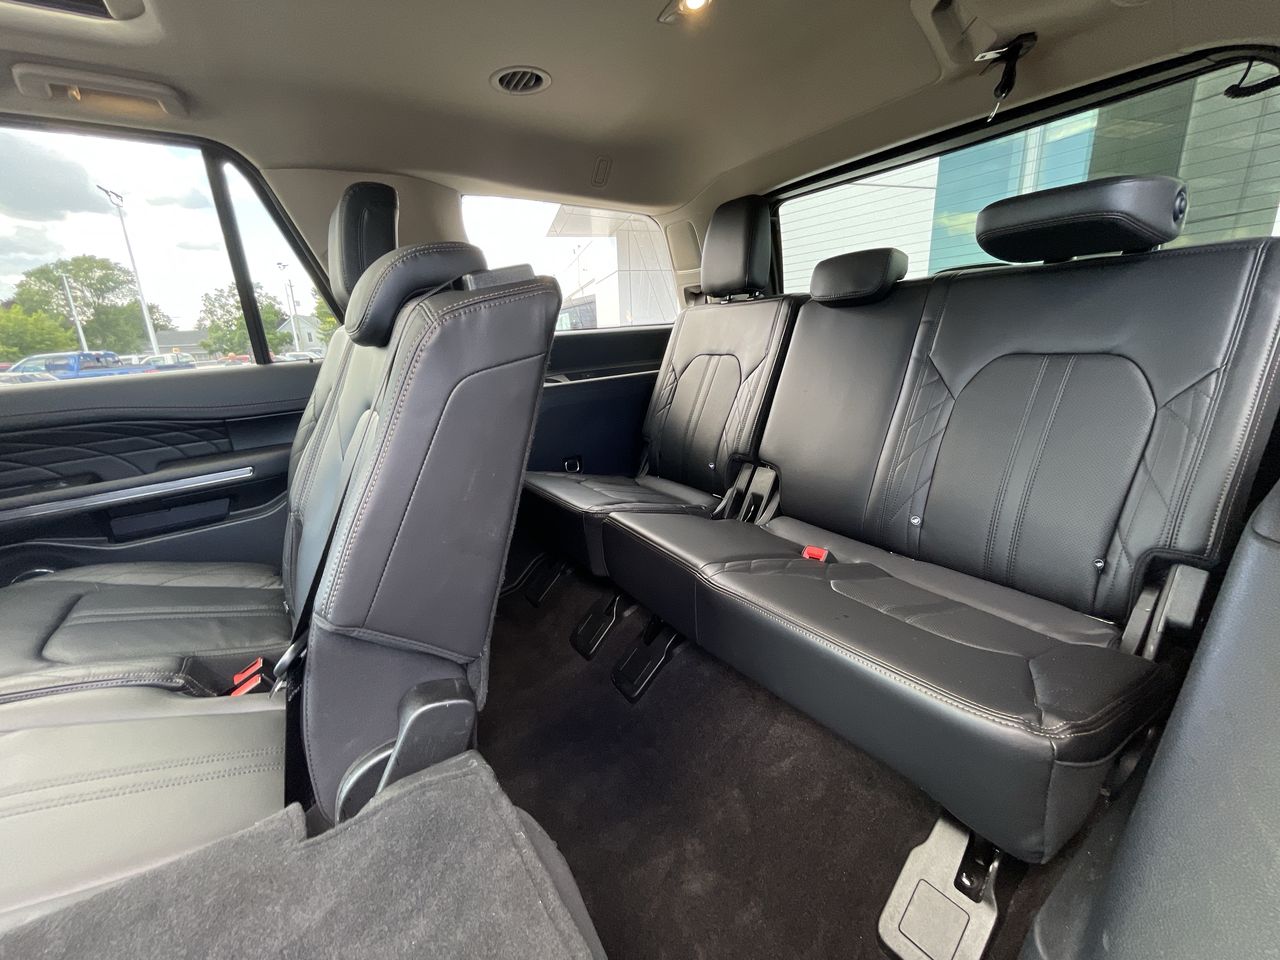 2021 Ford Expedition - P21237 Full Image 24